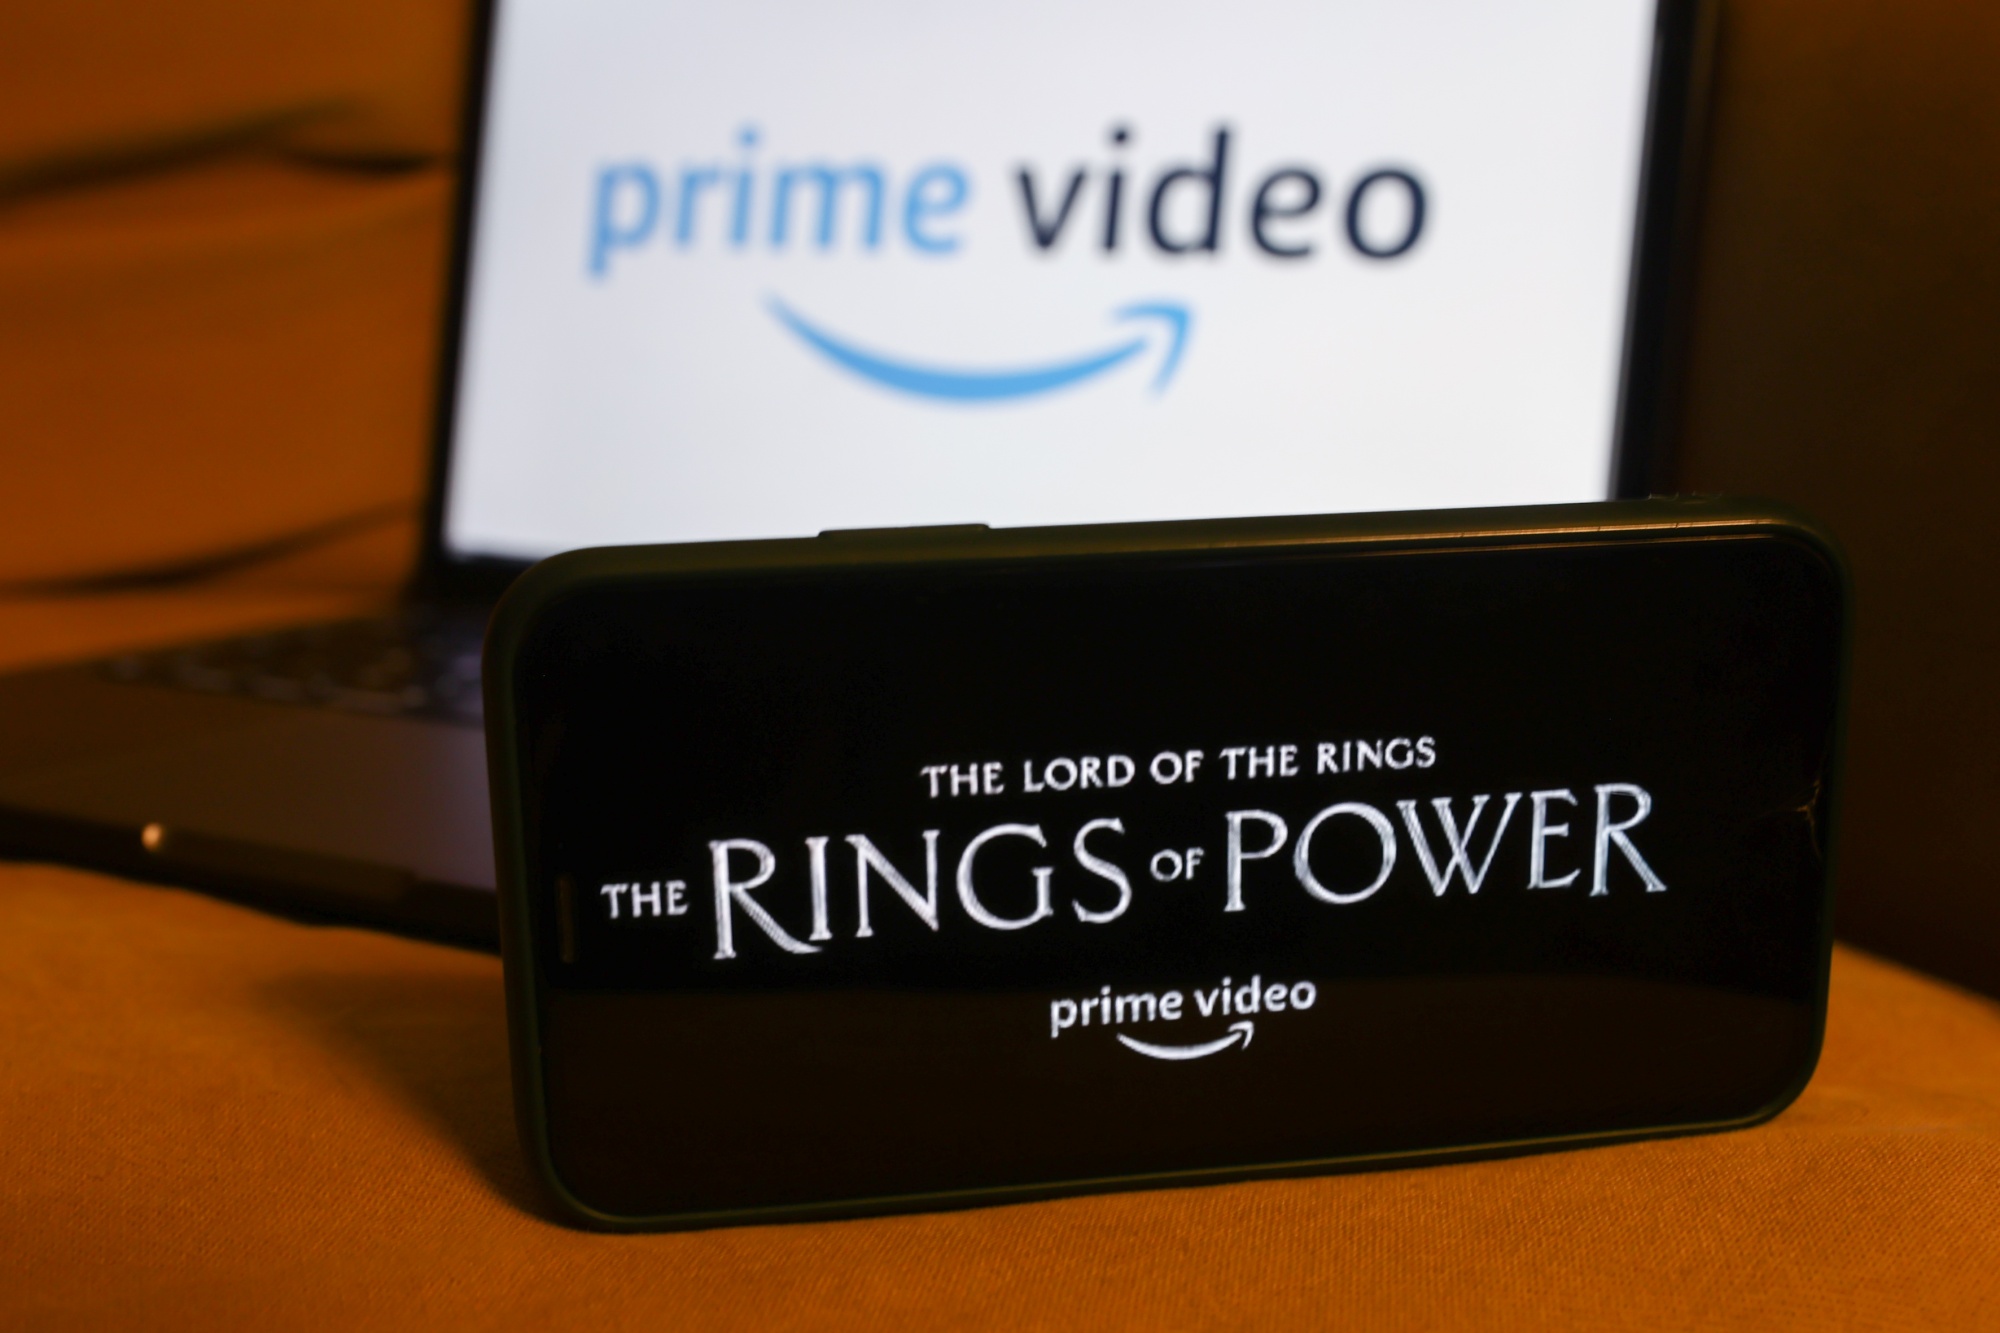 The Rings of Power tops Rotten Tomatoes' list of “most popular TV